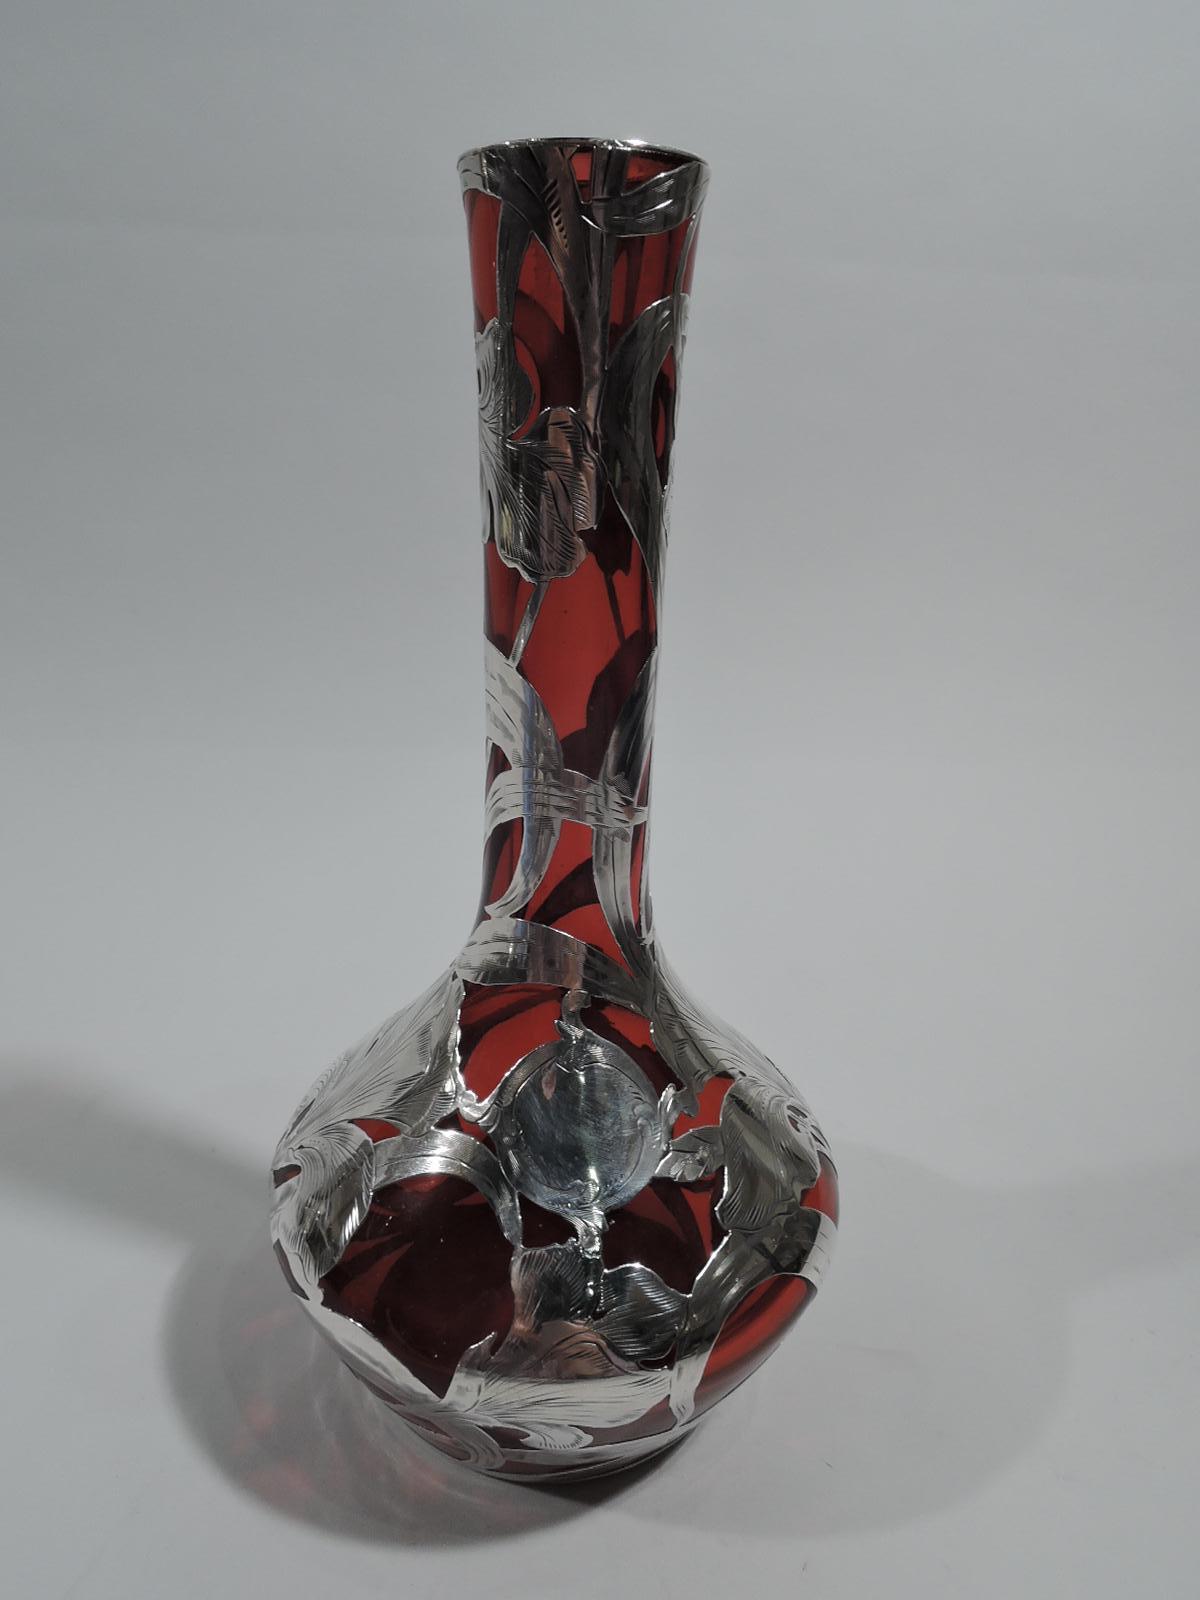 Turn-of-the-century Art Nouveau glass vase with engraved silver overlay. Made by Alvin in Providence. Bellied bowl and cylindrical neck with flat mouth. Bold and dynamic Overlay in form of iris flowers with entwined and scrolling tendrils. Glass is